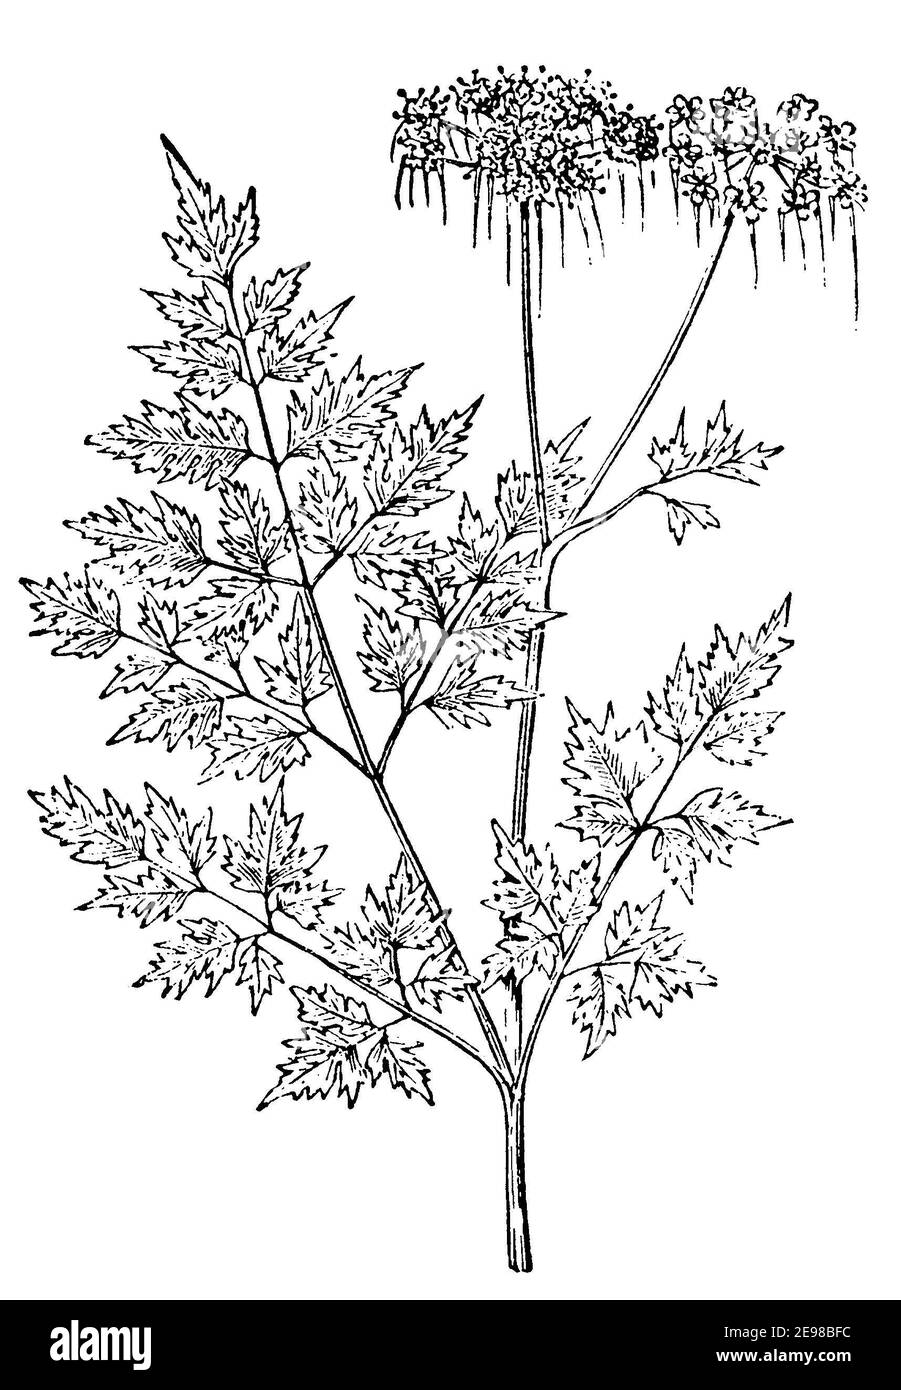 Narr's Petersilie, Narr's cicely, or poison Petersilie / Aethusa cynapium / Hundspetersilie (Bilderbuch, 1881) Stockfoto